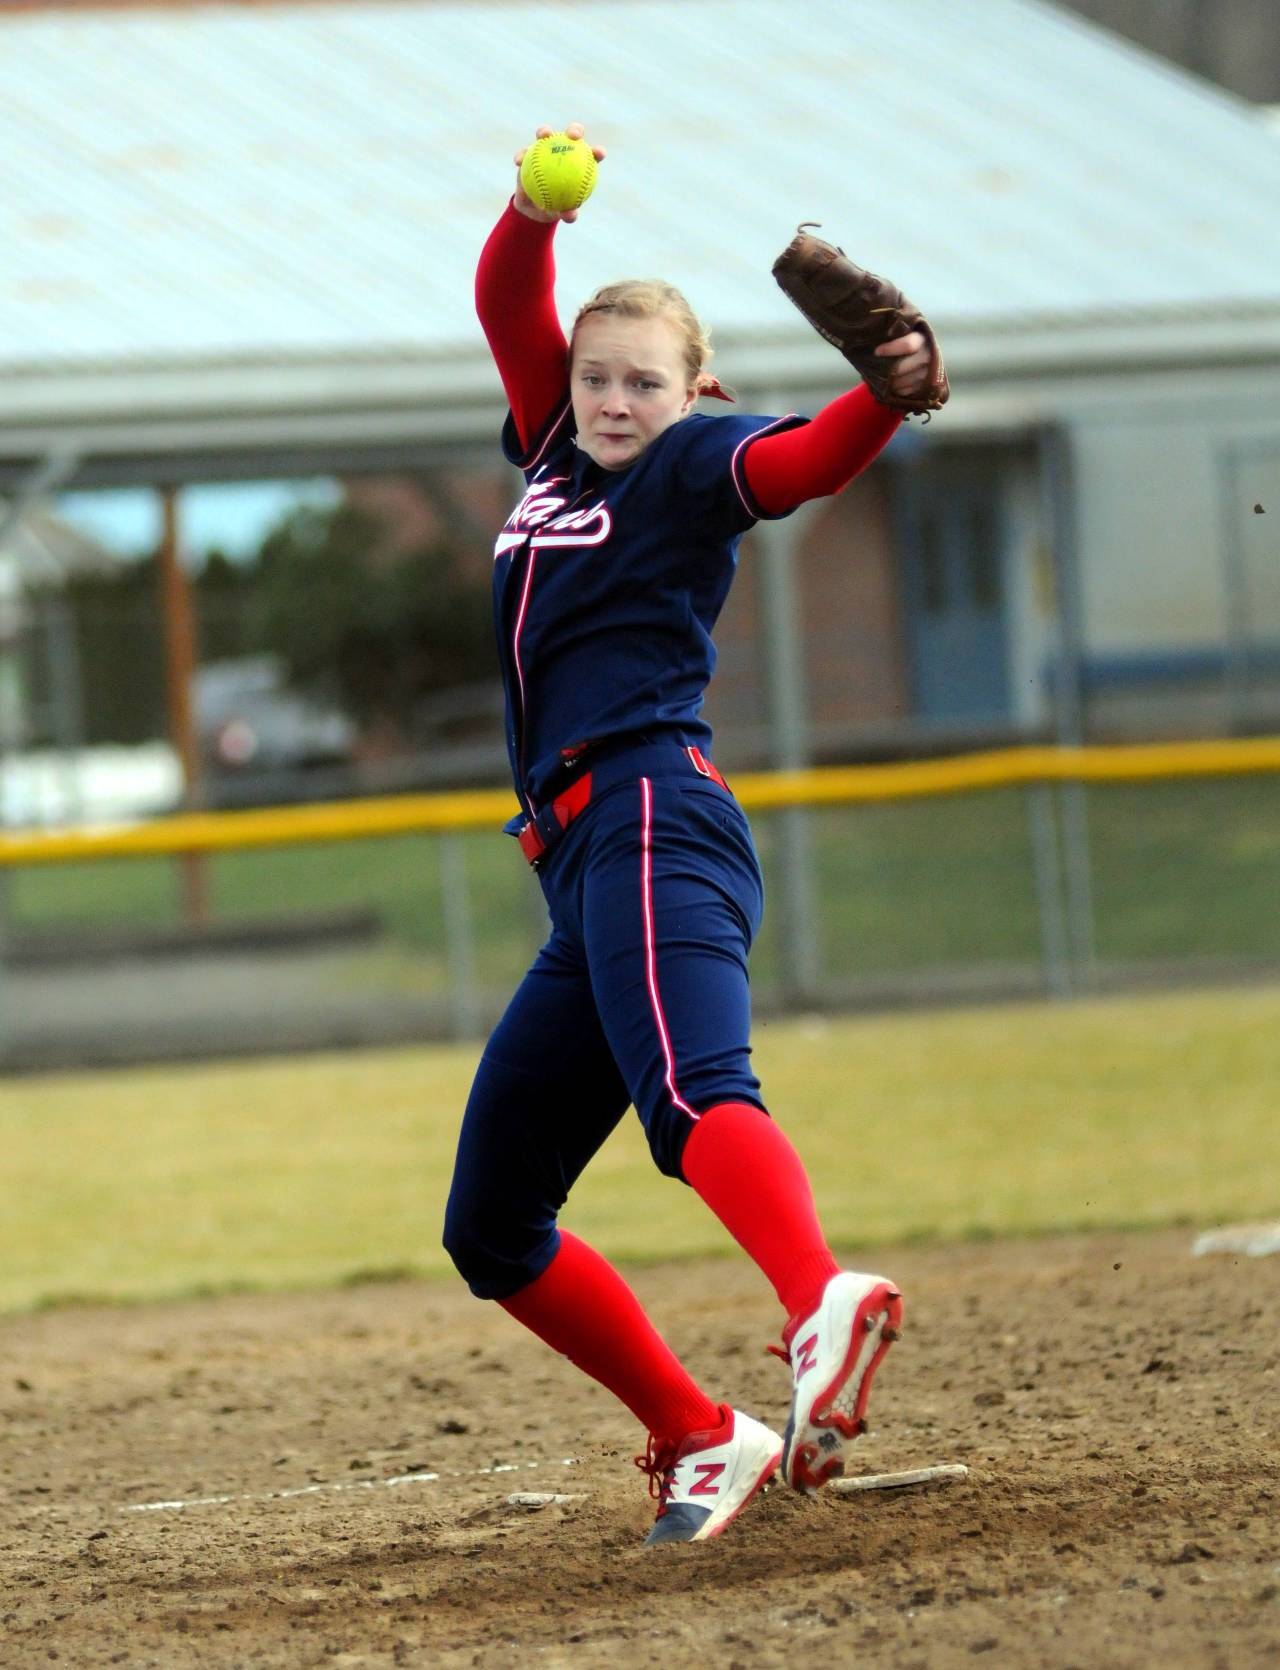 PWV freshman pitcher Olivia Matlock take a warm-up pitcher during her Game 2 start on Saturday against Ocosta. Matlock allowed no runs and just one hit in PWV’s 10-0 win. (Ryan Sparks | Grays Harbor News Group)